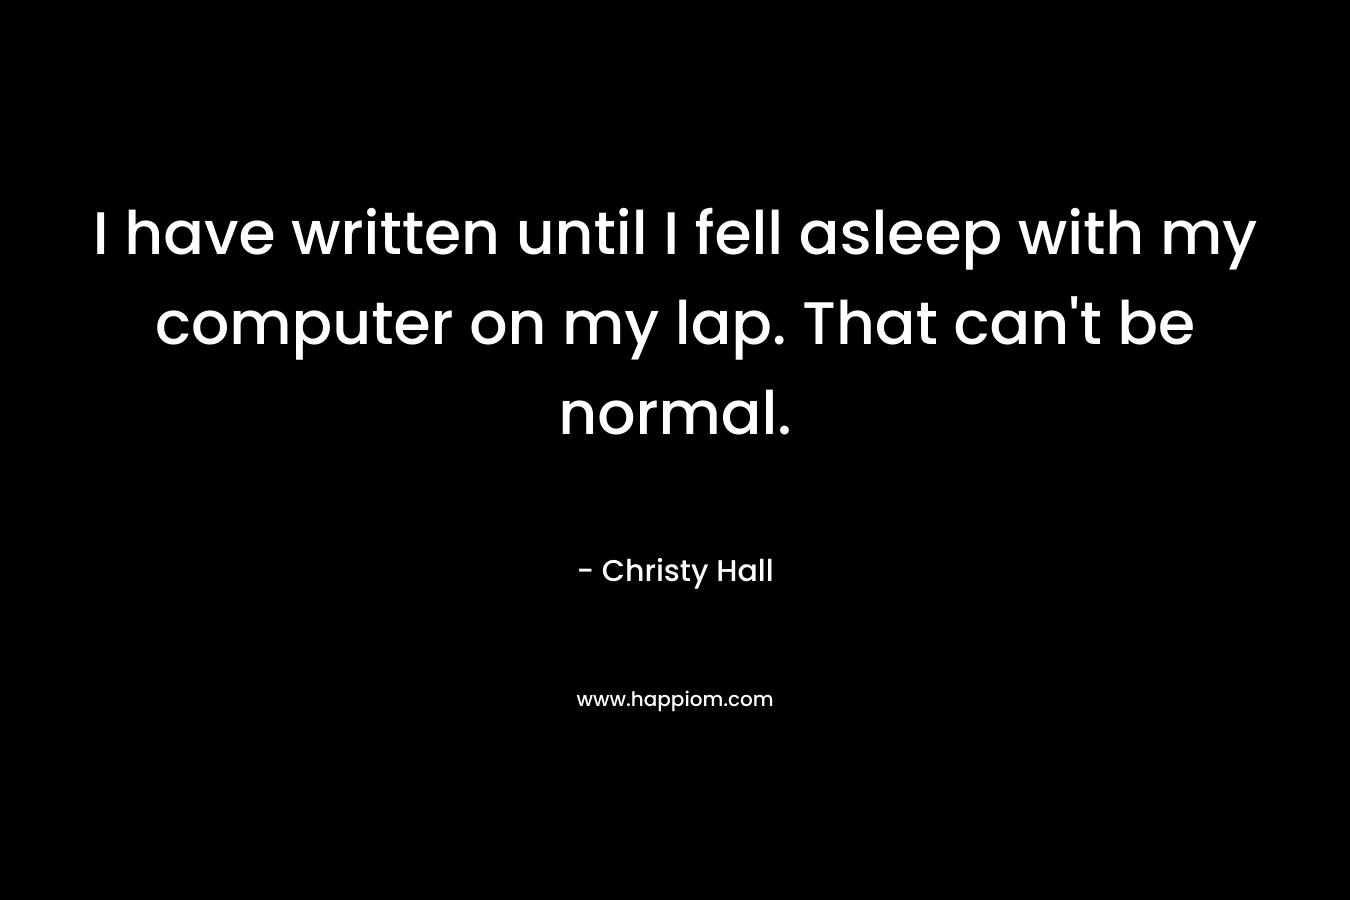 I have written until I fell asleep with my computer on my lap. That can't be normal.